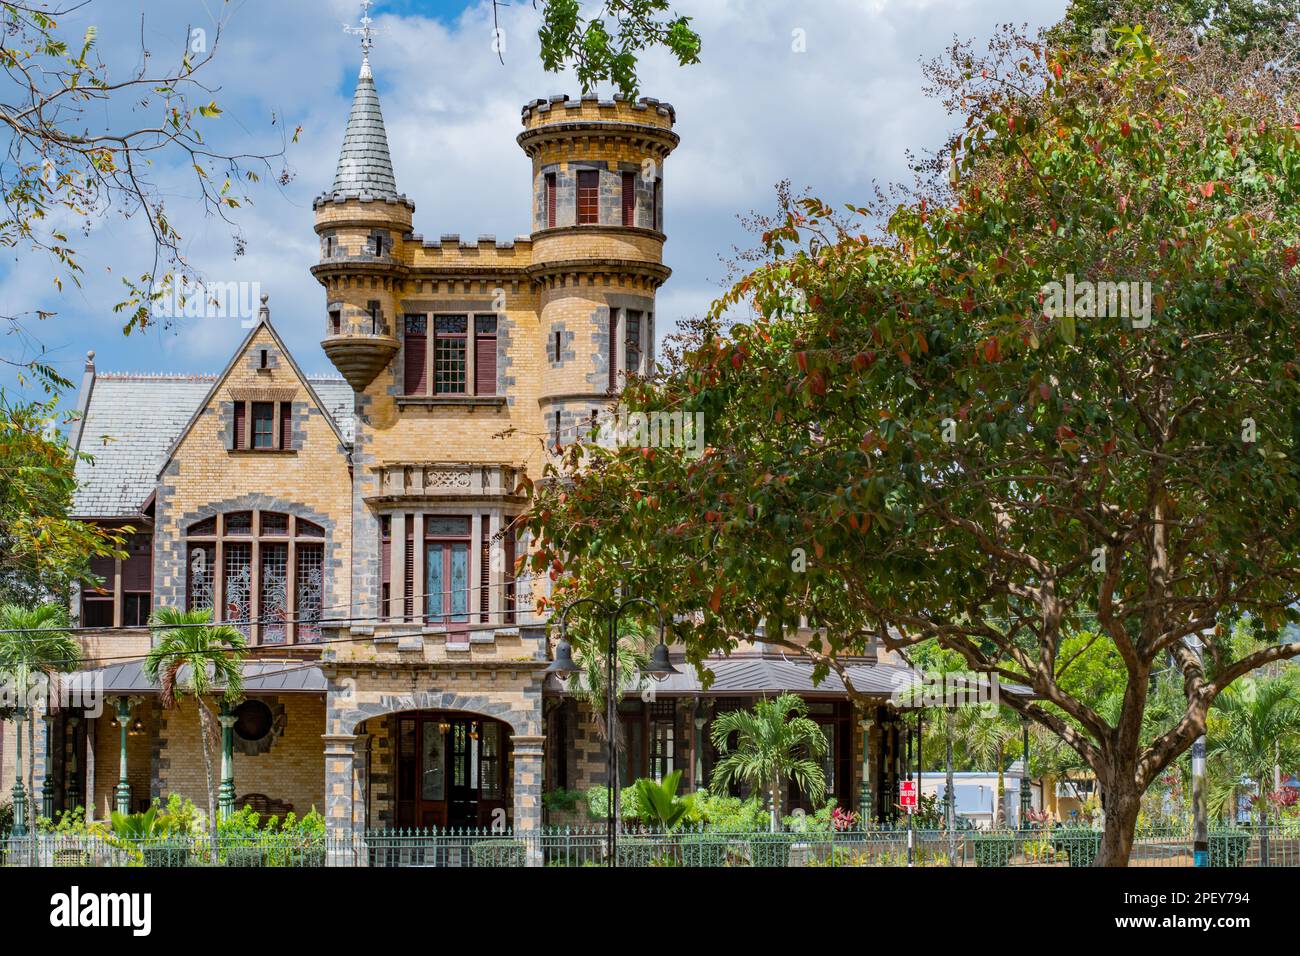 Beautiful brick facade of Stollmeyer's Castle, located in Port of Spain, Trinidad and Tobago. Stock Photo